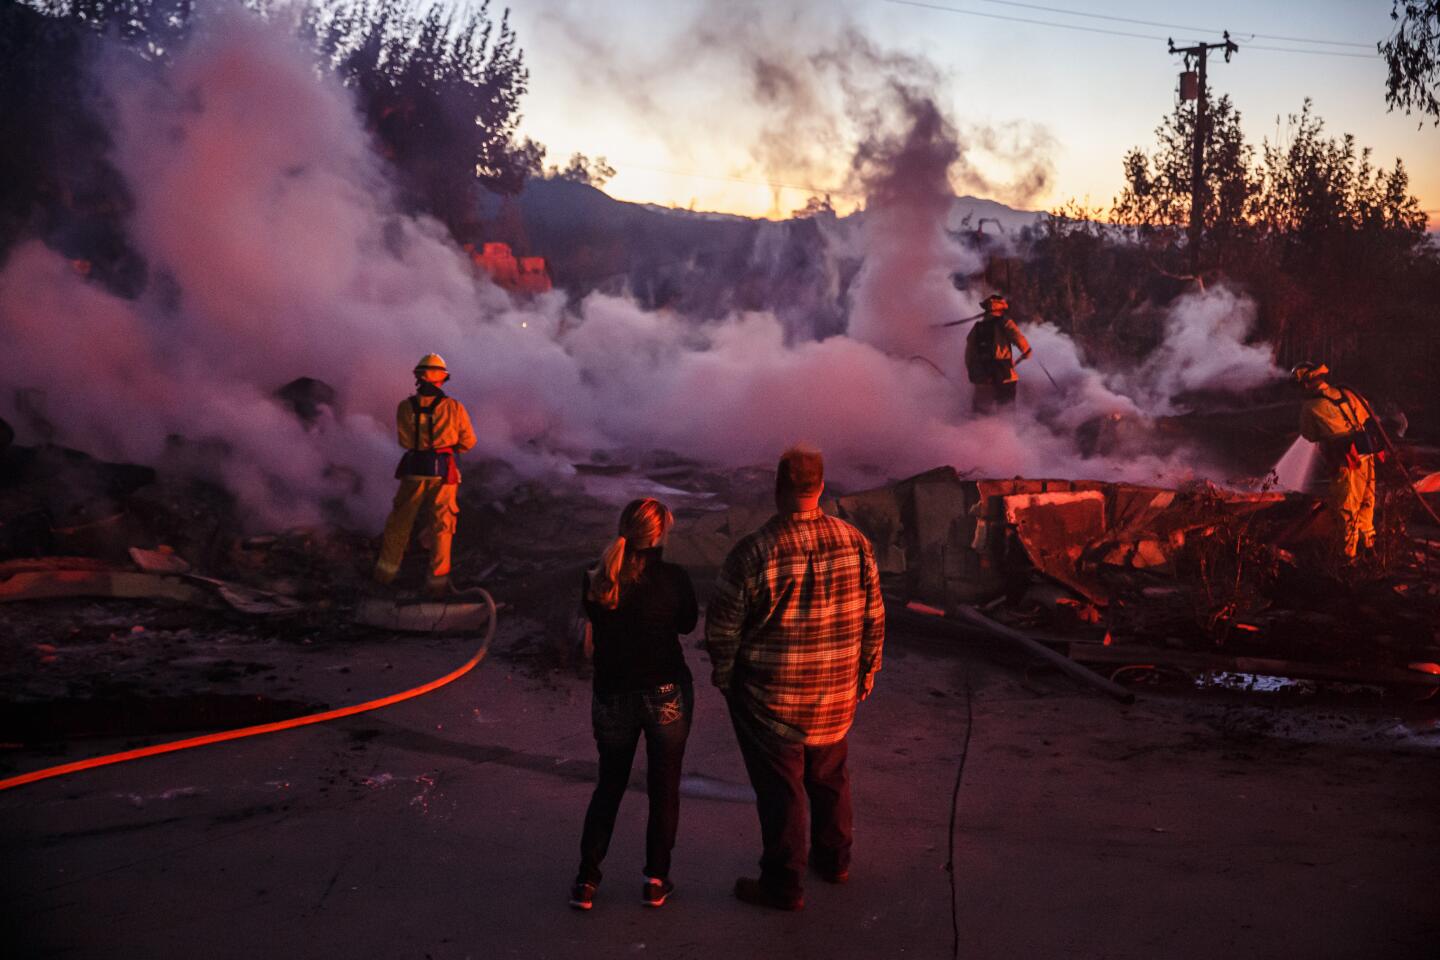 SAN BERNARDINO, CALIF. -- THURSDAY, OCTOBER 31, 2019: Family members look on as firefighters mop up a burned down home destroyed by the Hillside Fire in San Bernardino, Calif., on Oct. 31, 2019. (Marcus Yam / Los Angeles Times)